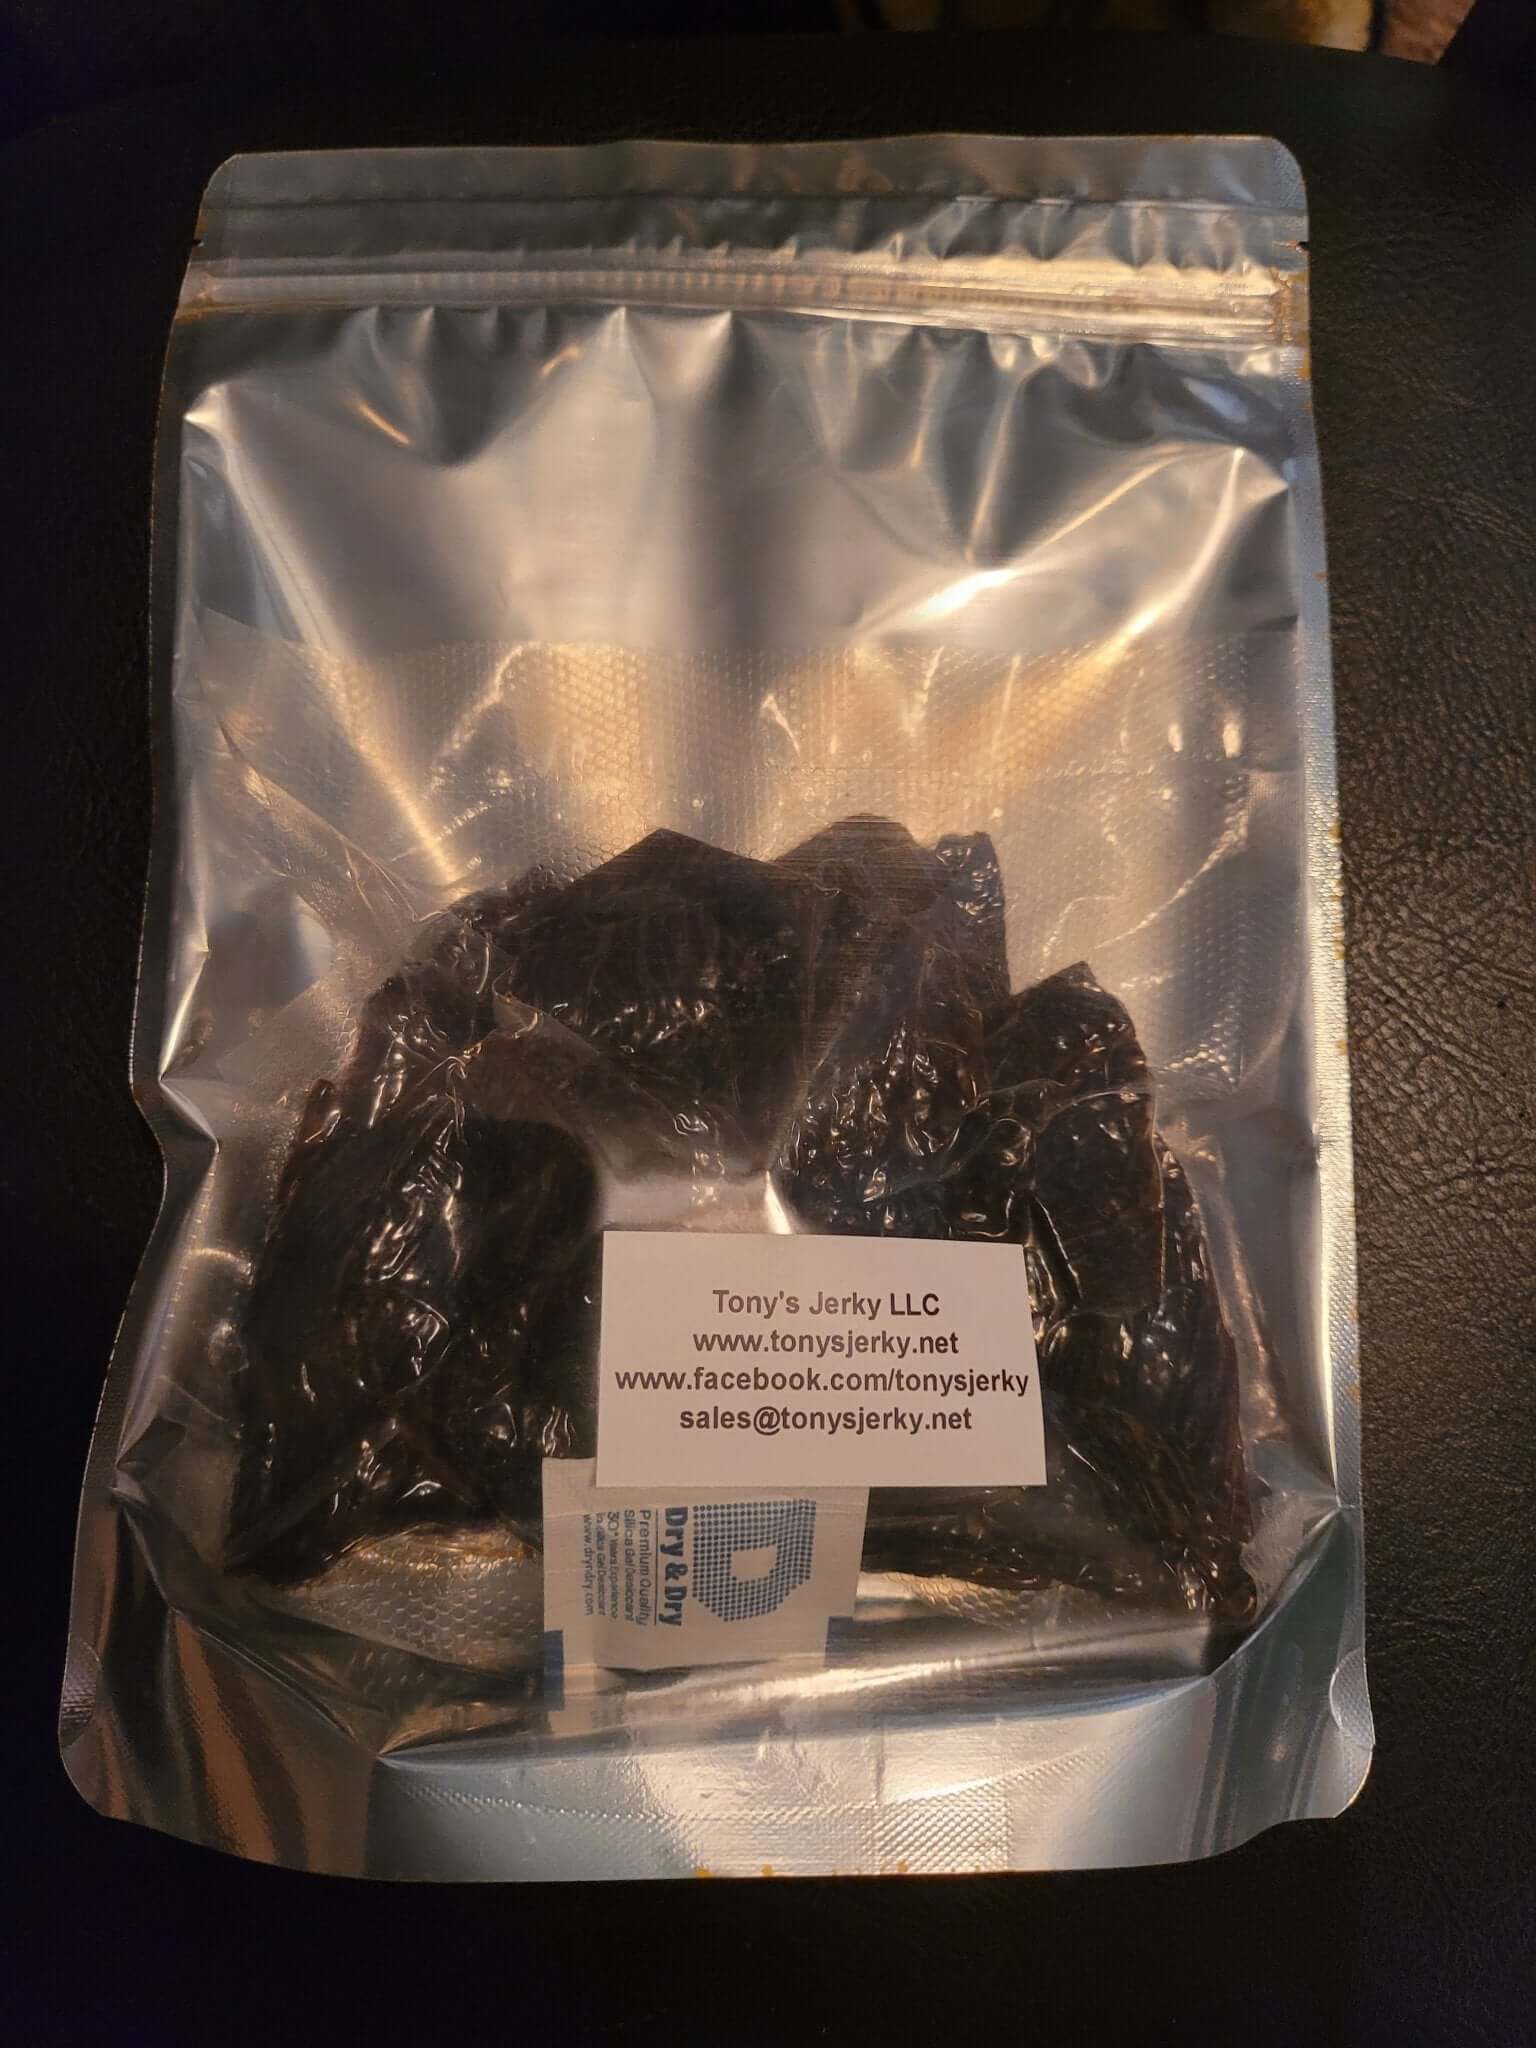 dragonfire flavored beef jerky